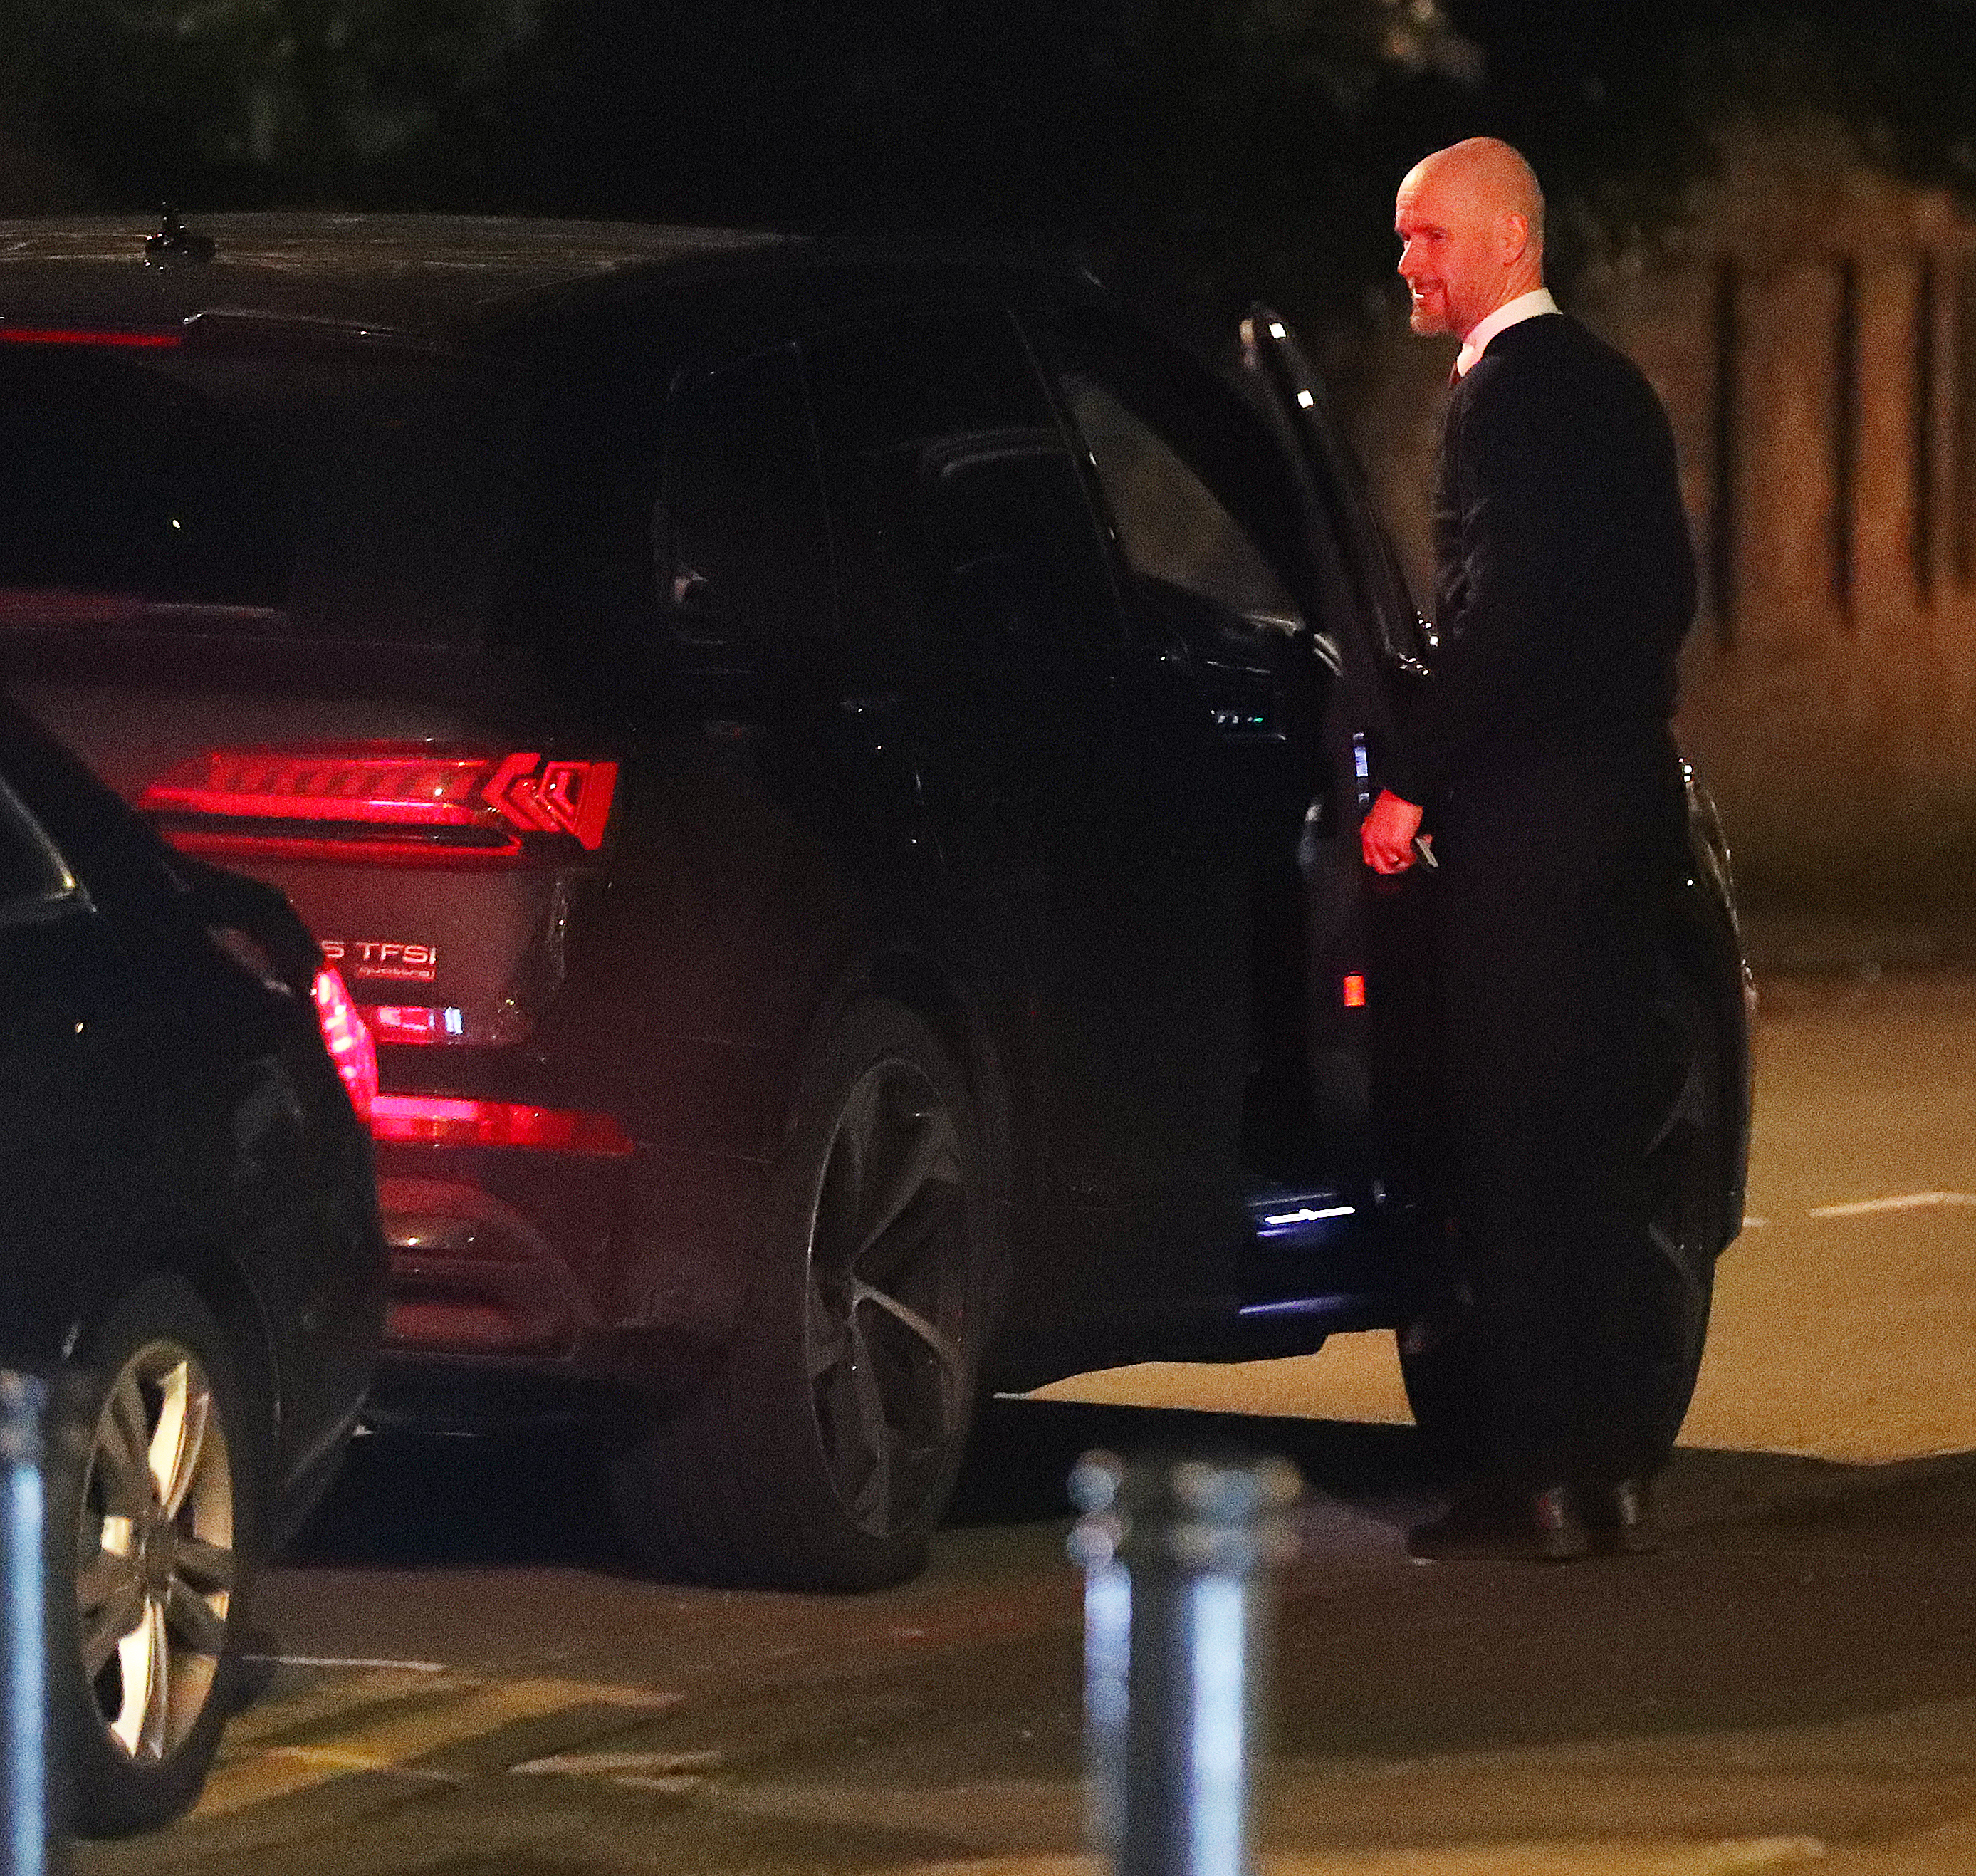 He was all-smiles as he climbed back into his motor to head home after dinner